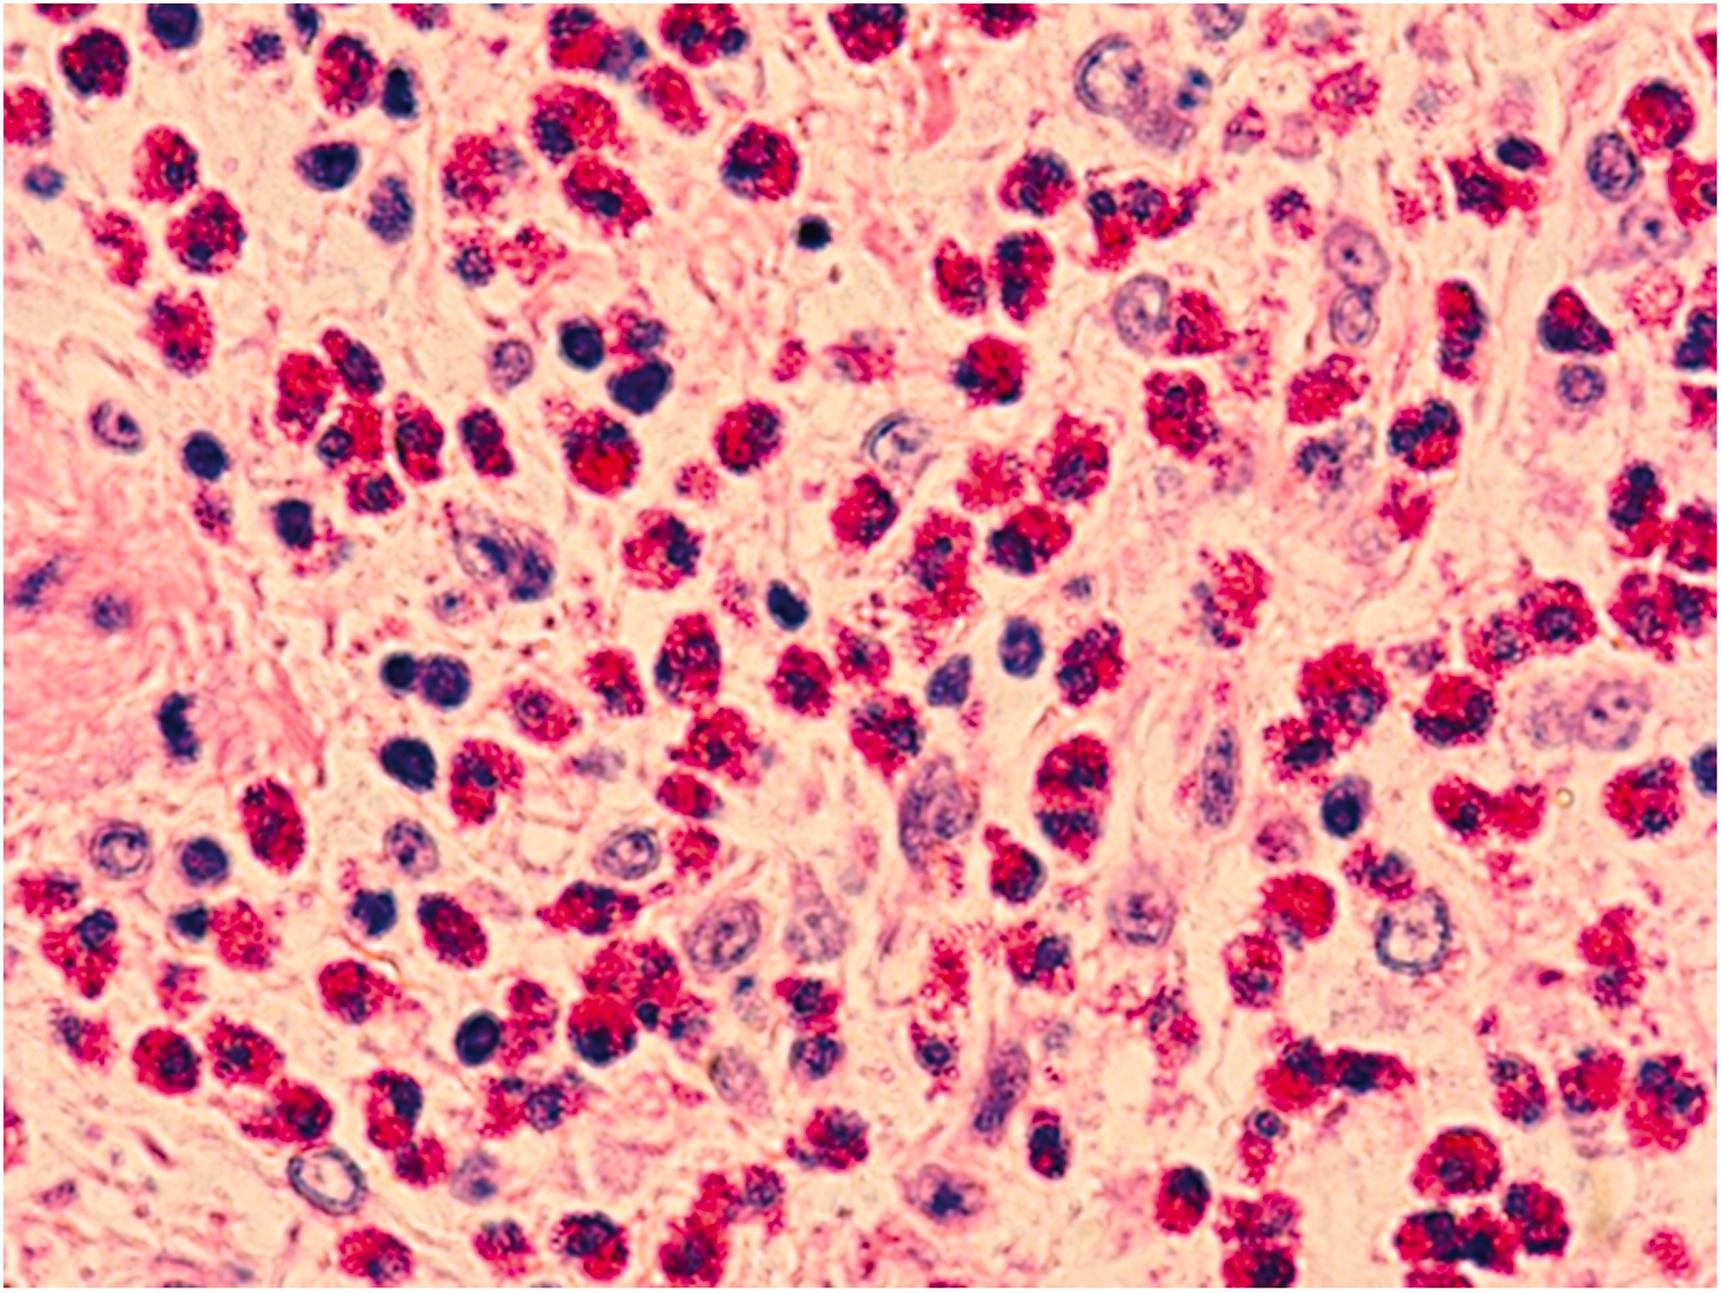 Figure 12.4, Section from explanted heart of patient undergoing transplantation showing severe eosinophilic/hypersensitivity myocarditis. The patient was on 31 medications including antibiotics and inotropic agents (H&E stain 400×).